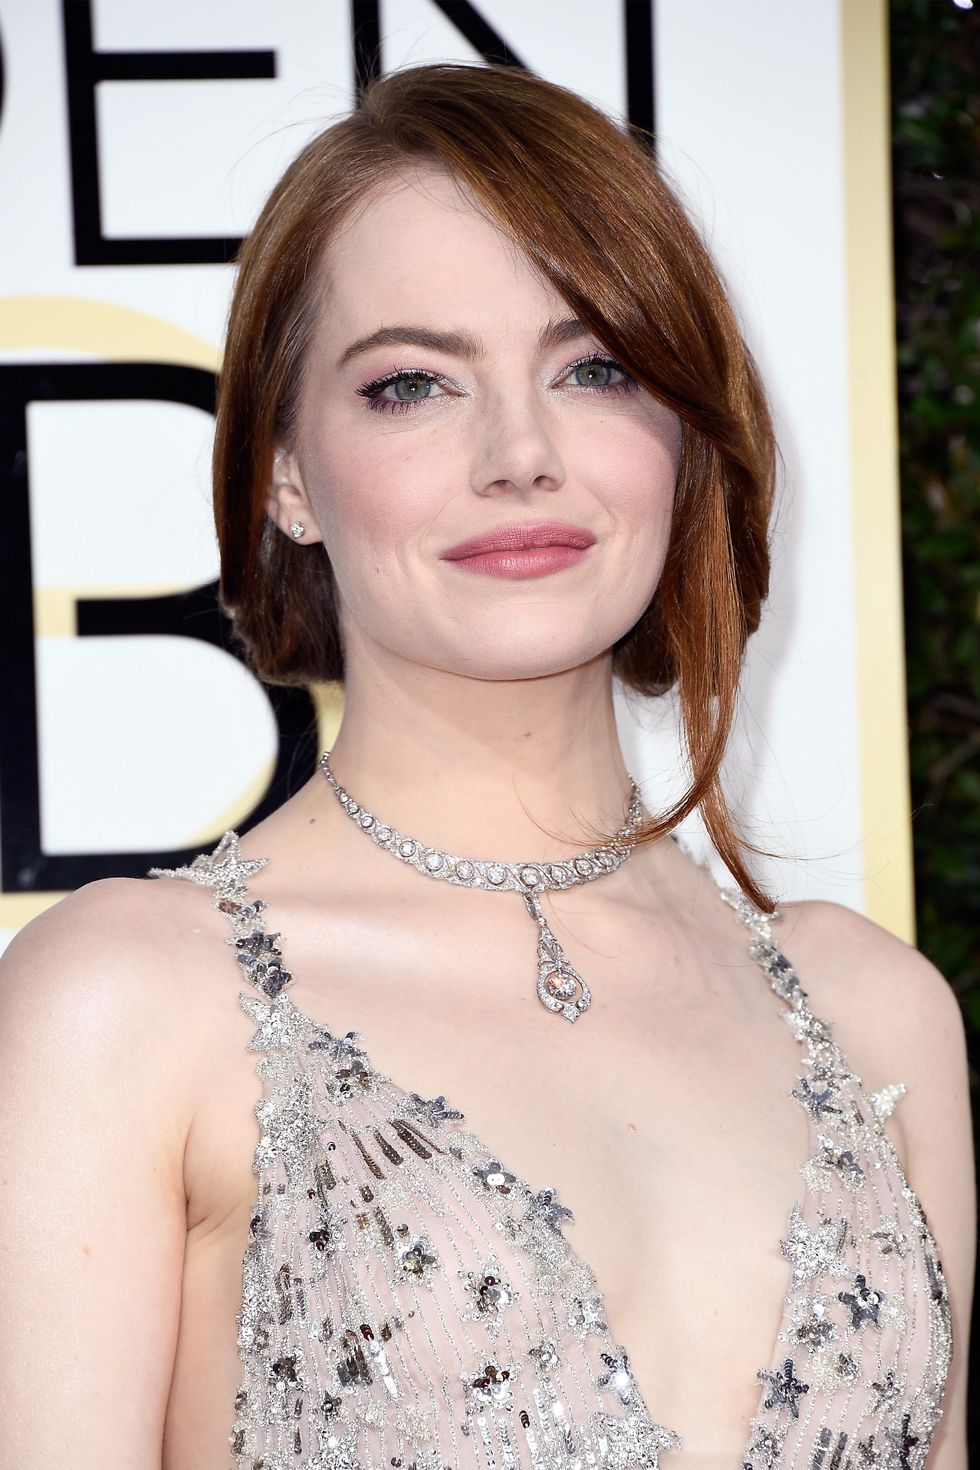 BEVERLY HILLS, CA - JANUARY 08:  Actress Emma Stone attends the 74th Annual Golden Globe Awards at The Beverly Hilton Hotel on January 8, 2017 in Beverly Hills, California.  (Photo by Frazer Harrison/Getty Images)